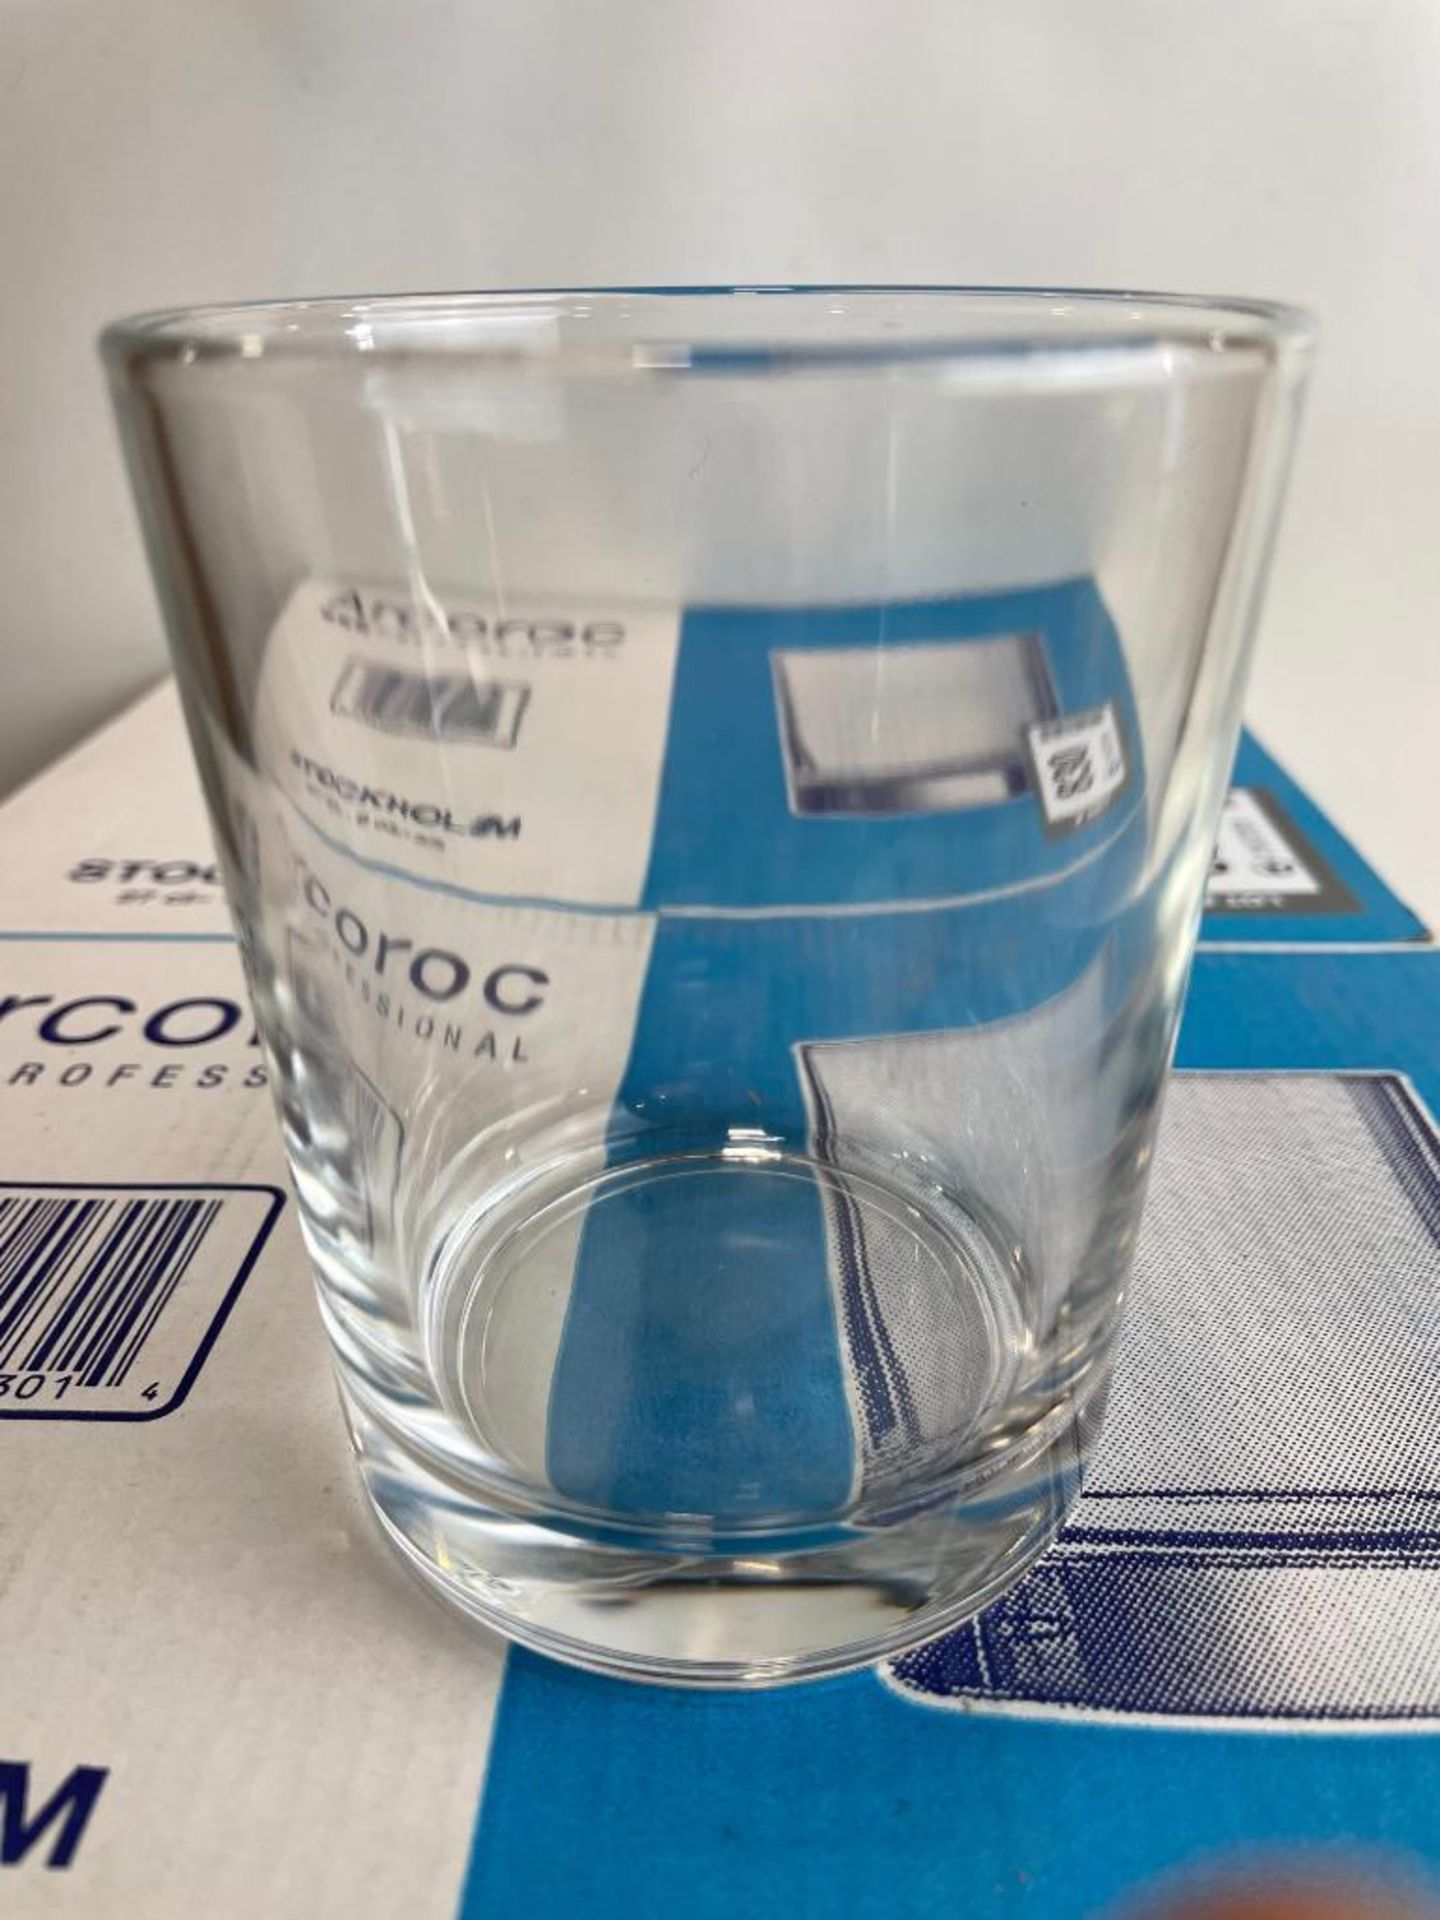 4 BOXES OF 9.5OZ/270ML STOCKHOLM OLD FASHIONED GLASSES - 6 PER BOX, ARCOROC 00826 - NEW - Image 2 of 3